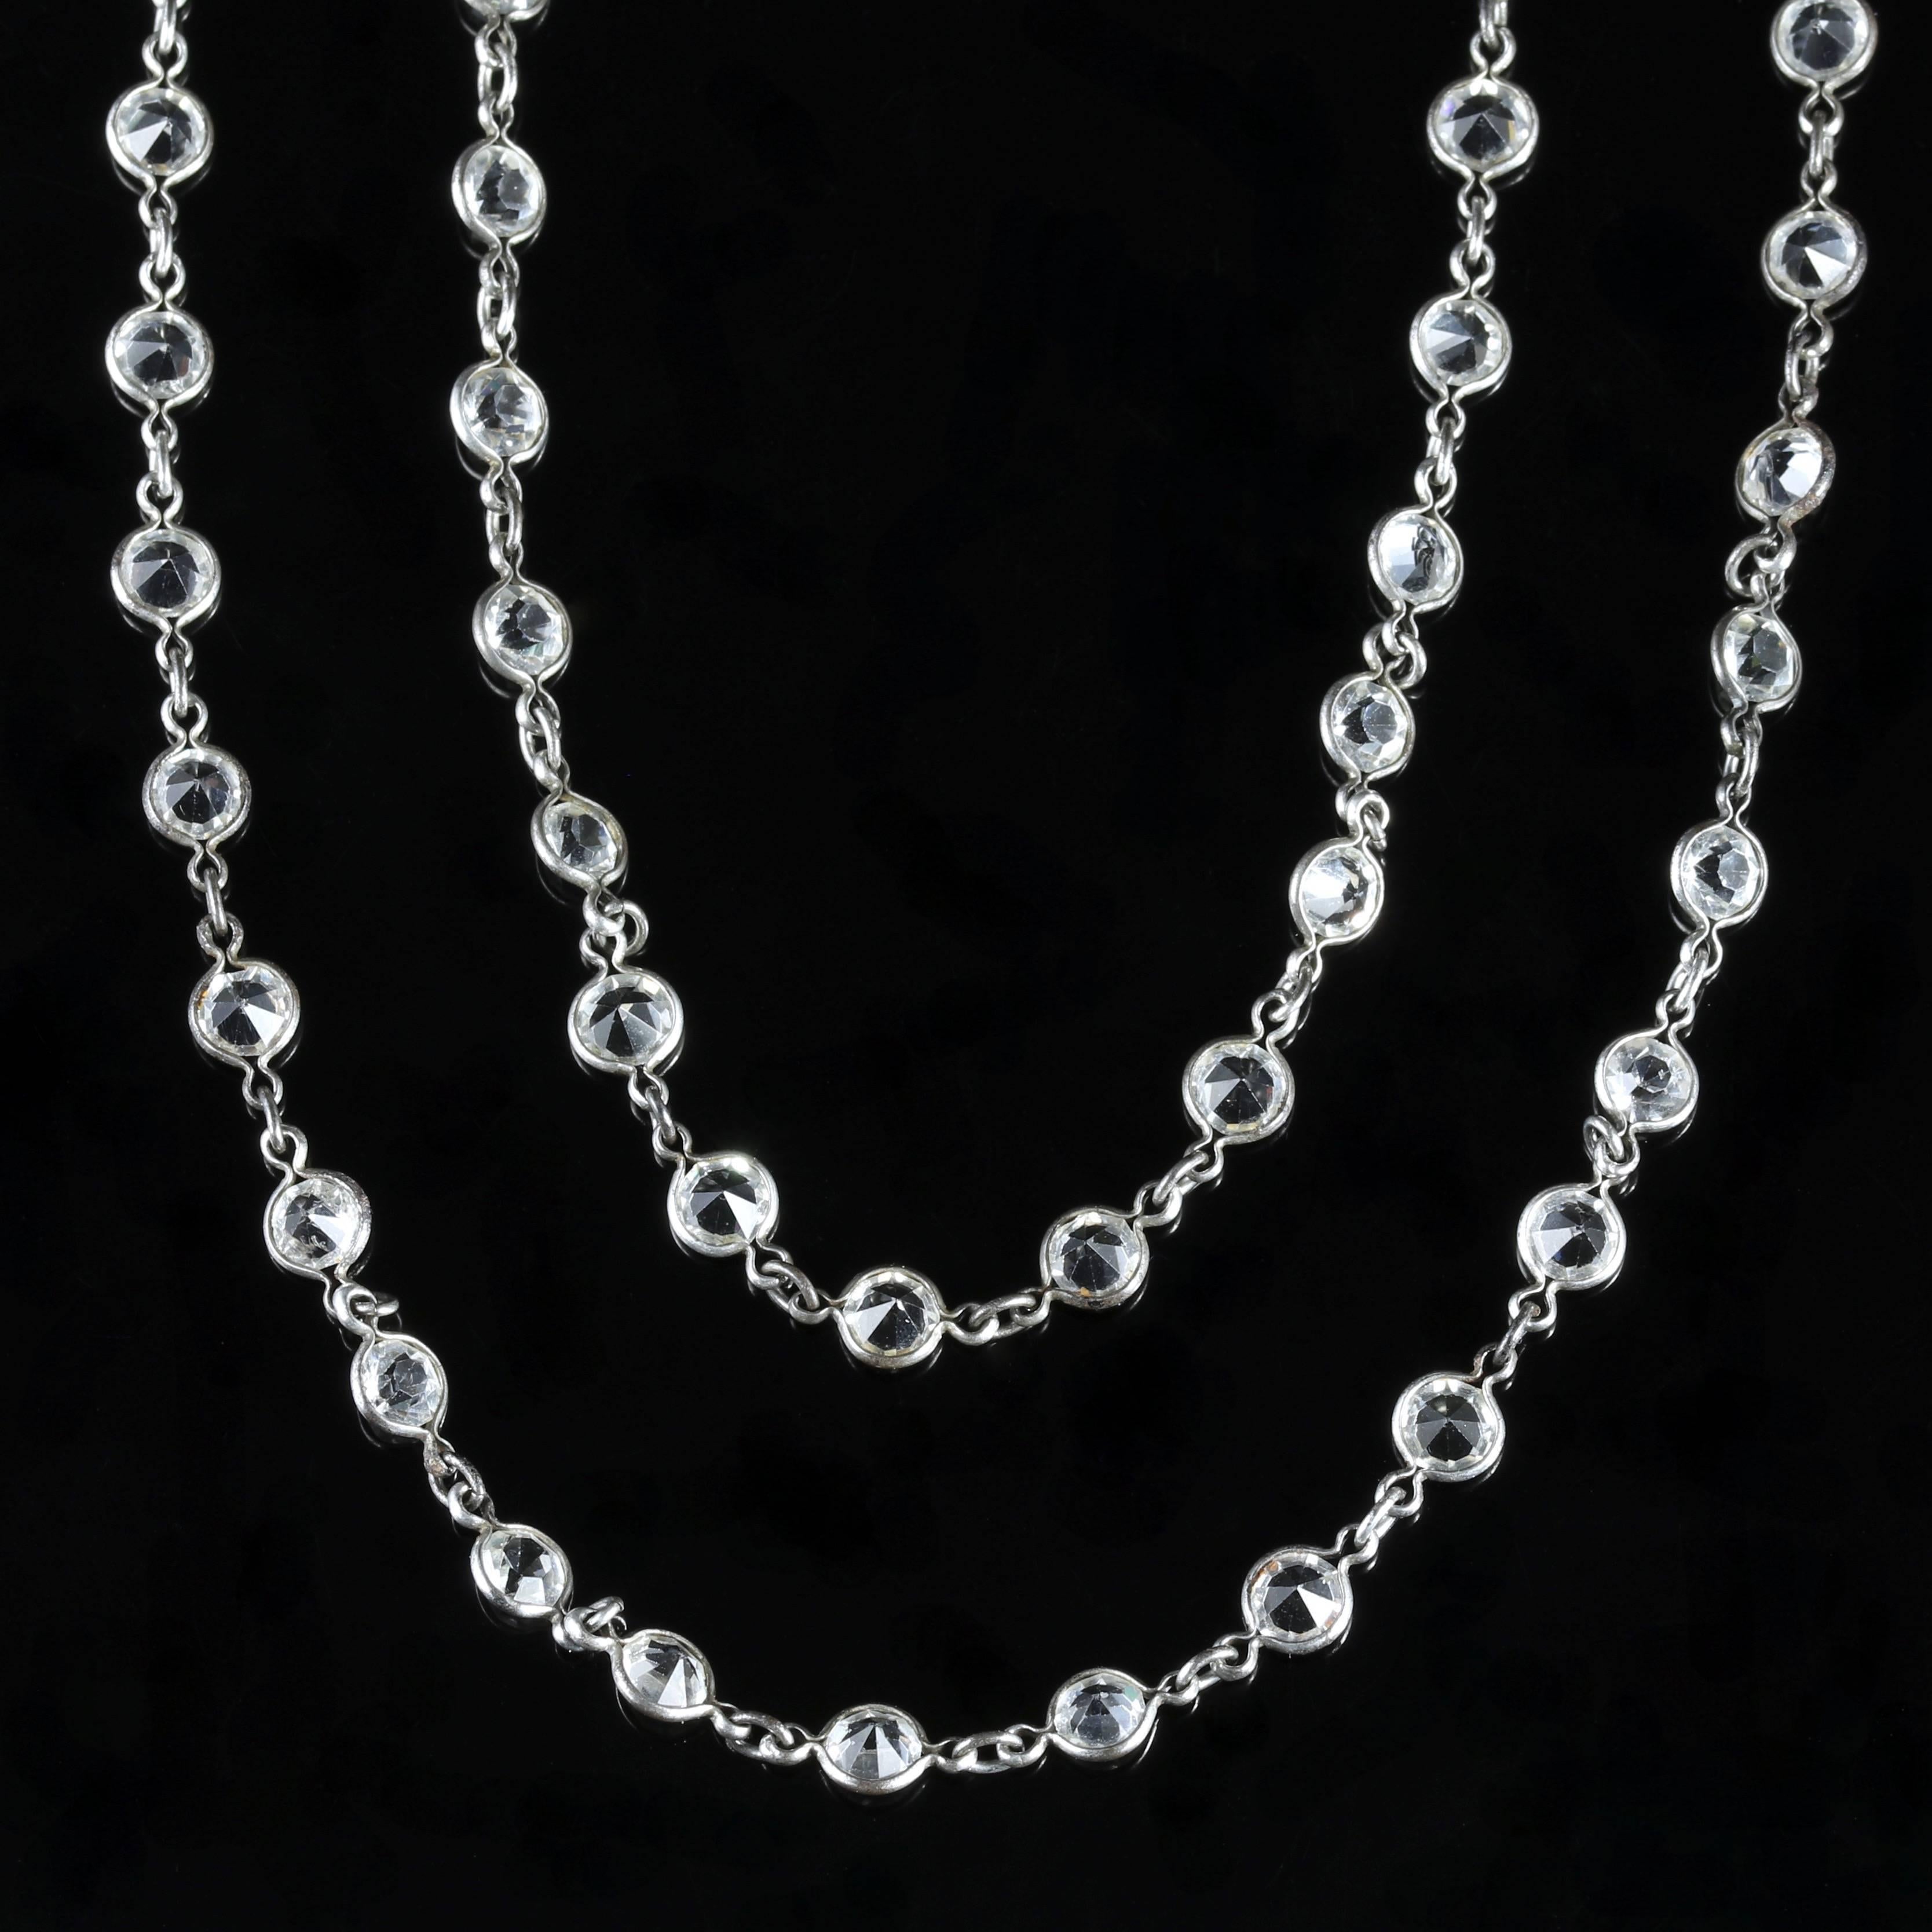 To read more please click continue reading below-

This fabulous long Sterling Silver Victorian necklace is set with old cut Paste Stones.

Genuine Victorian, Circa 1900. 

These used to be known as muff chains which were a long chain worn around